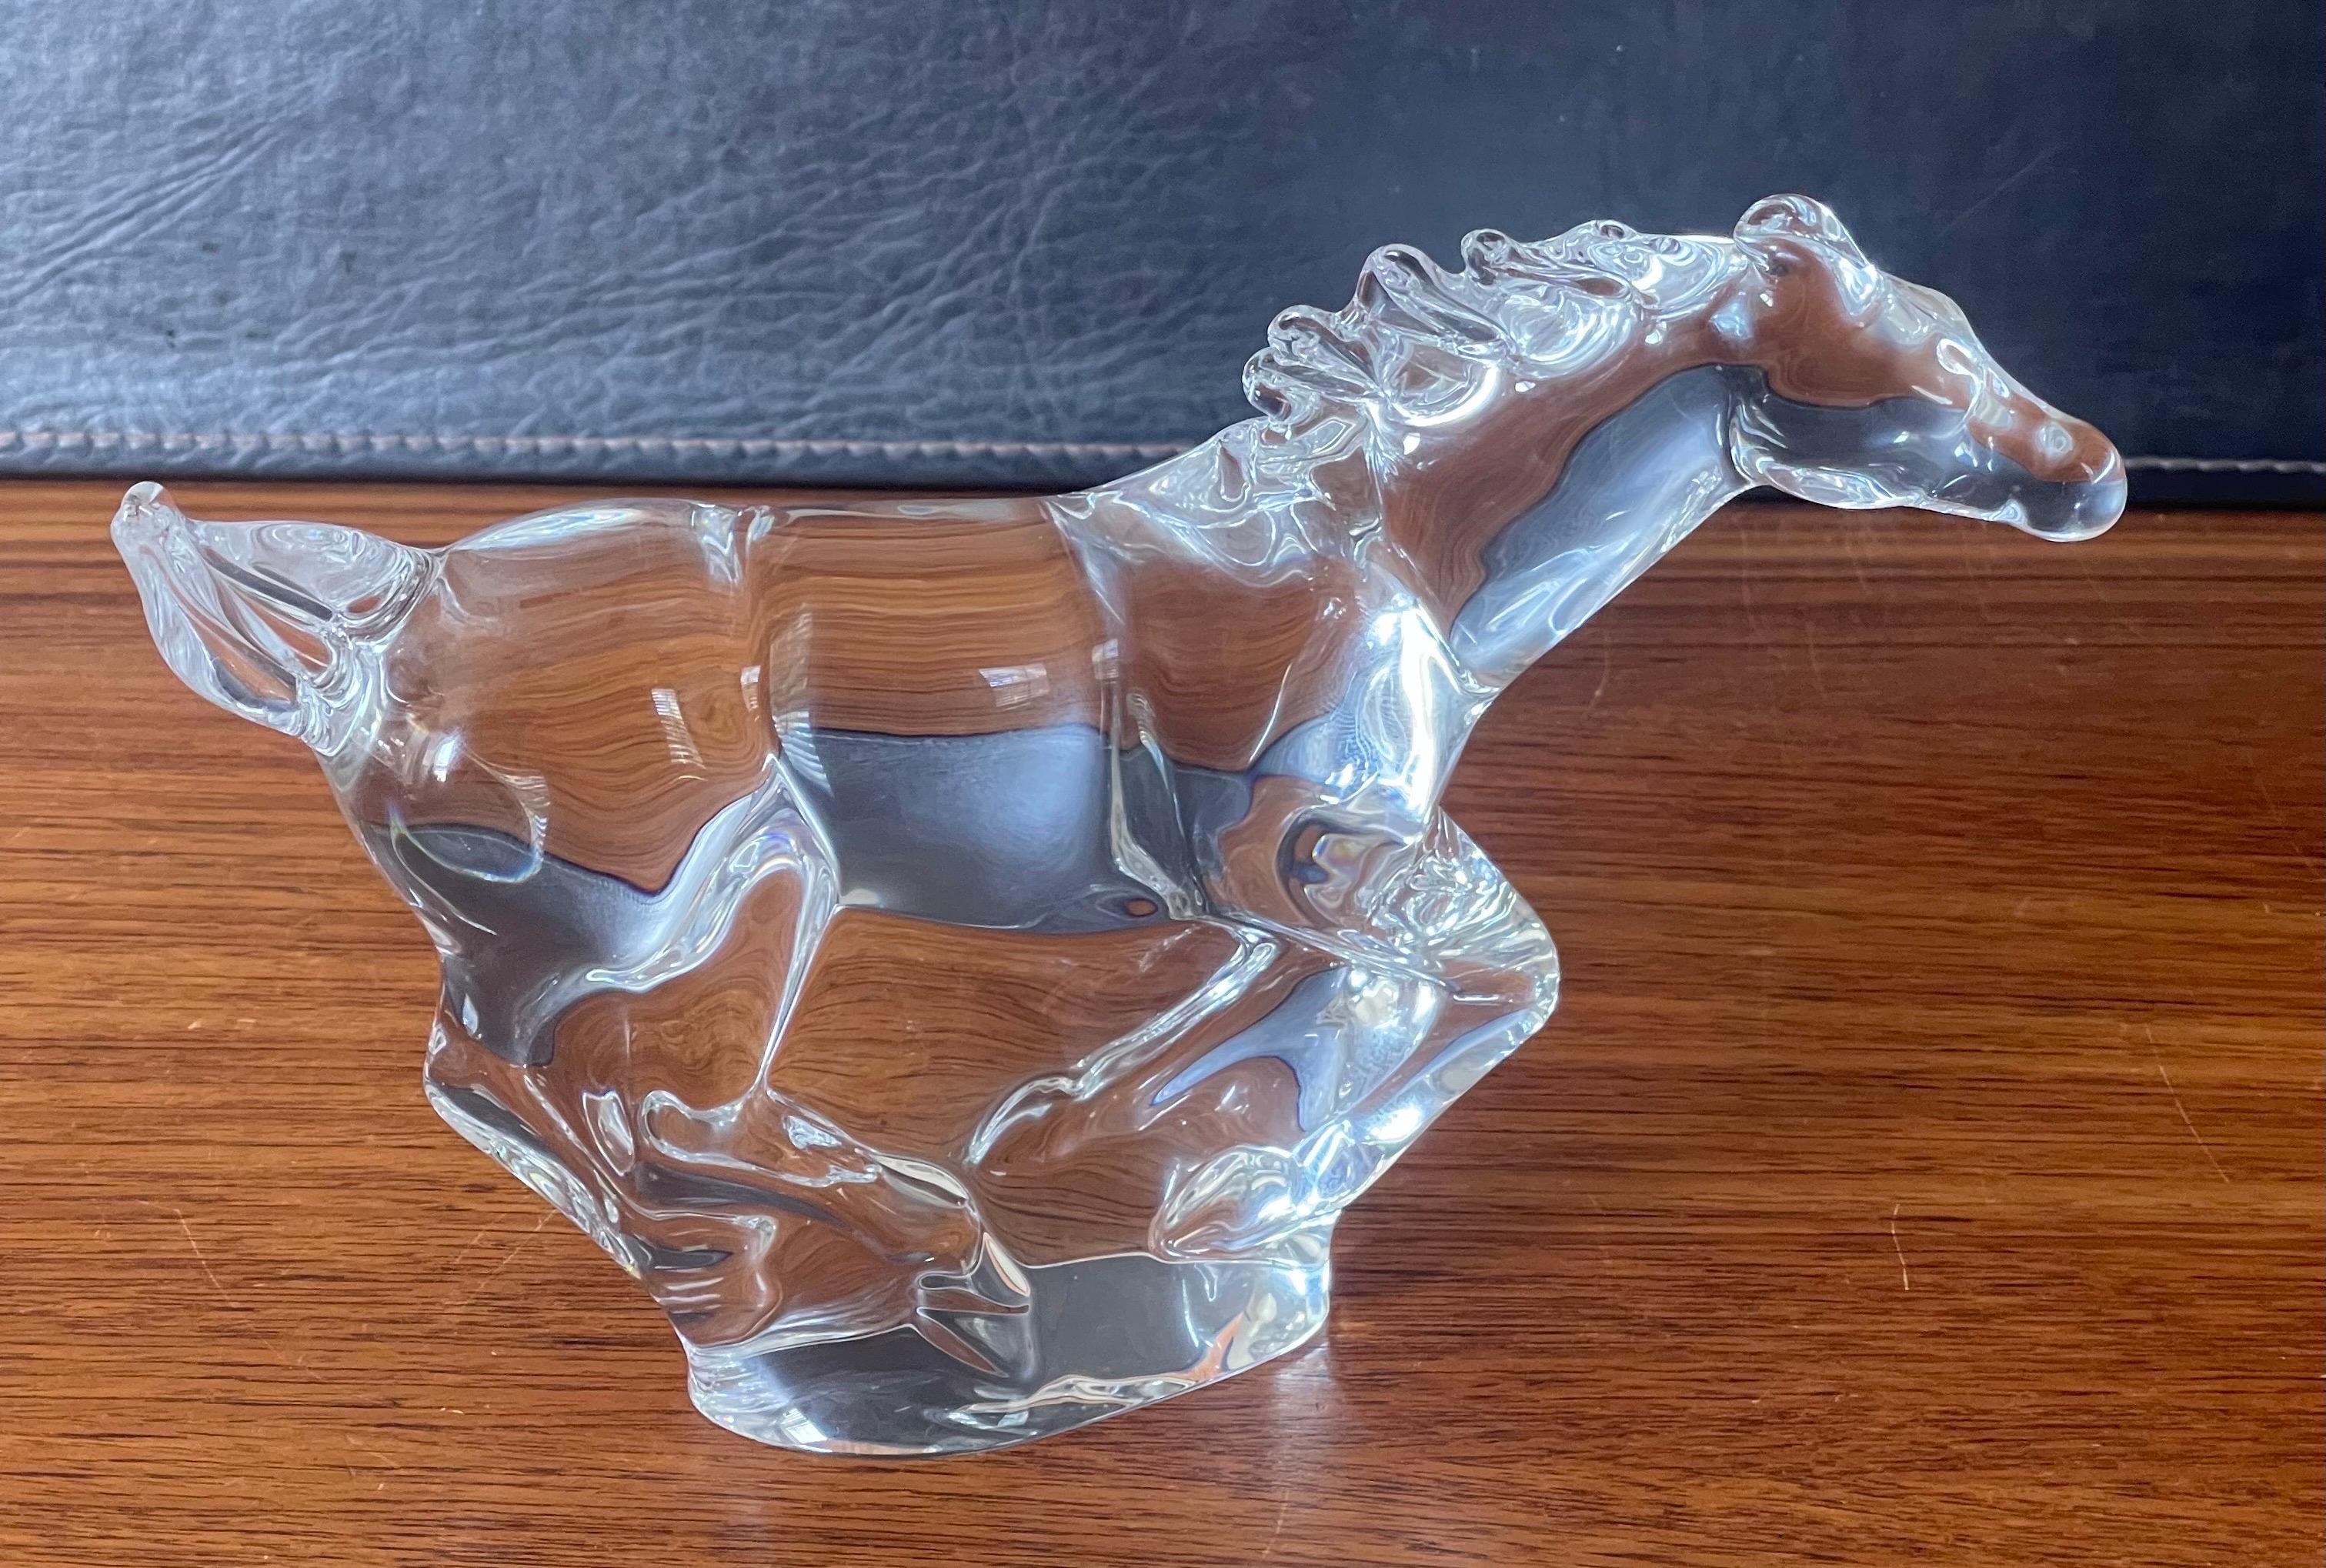 Crystal Galloping Horse / Mustang Sculpture by Steuben Glassworks For Sale 4